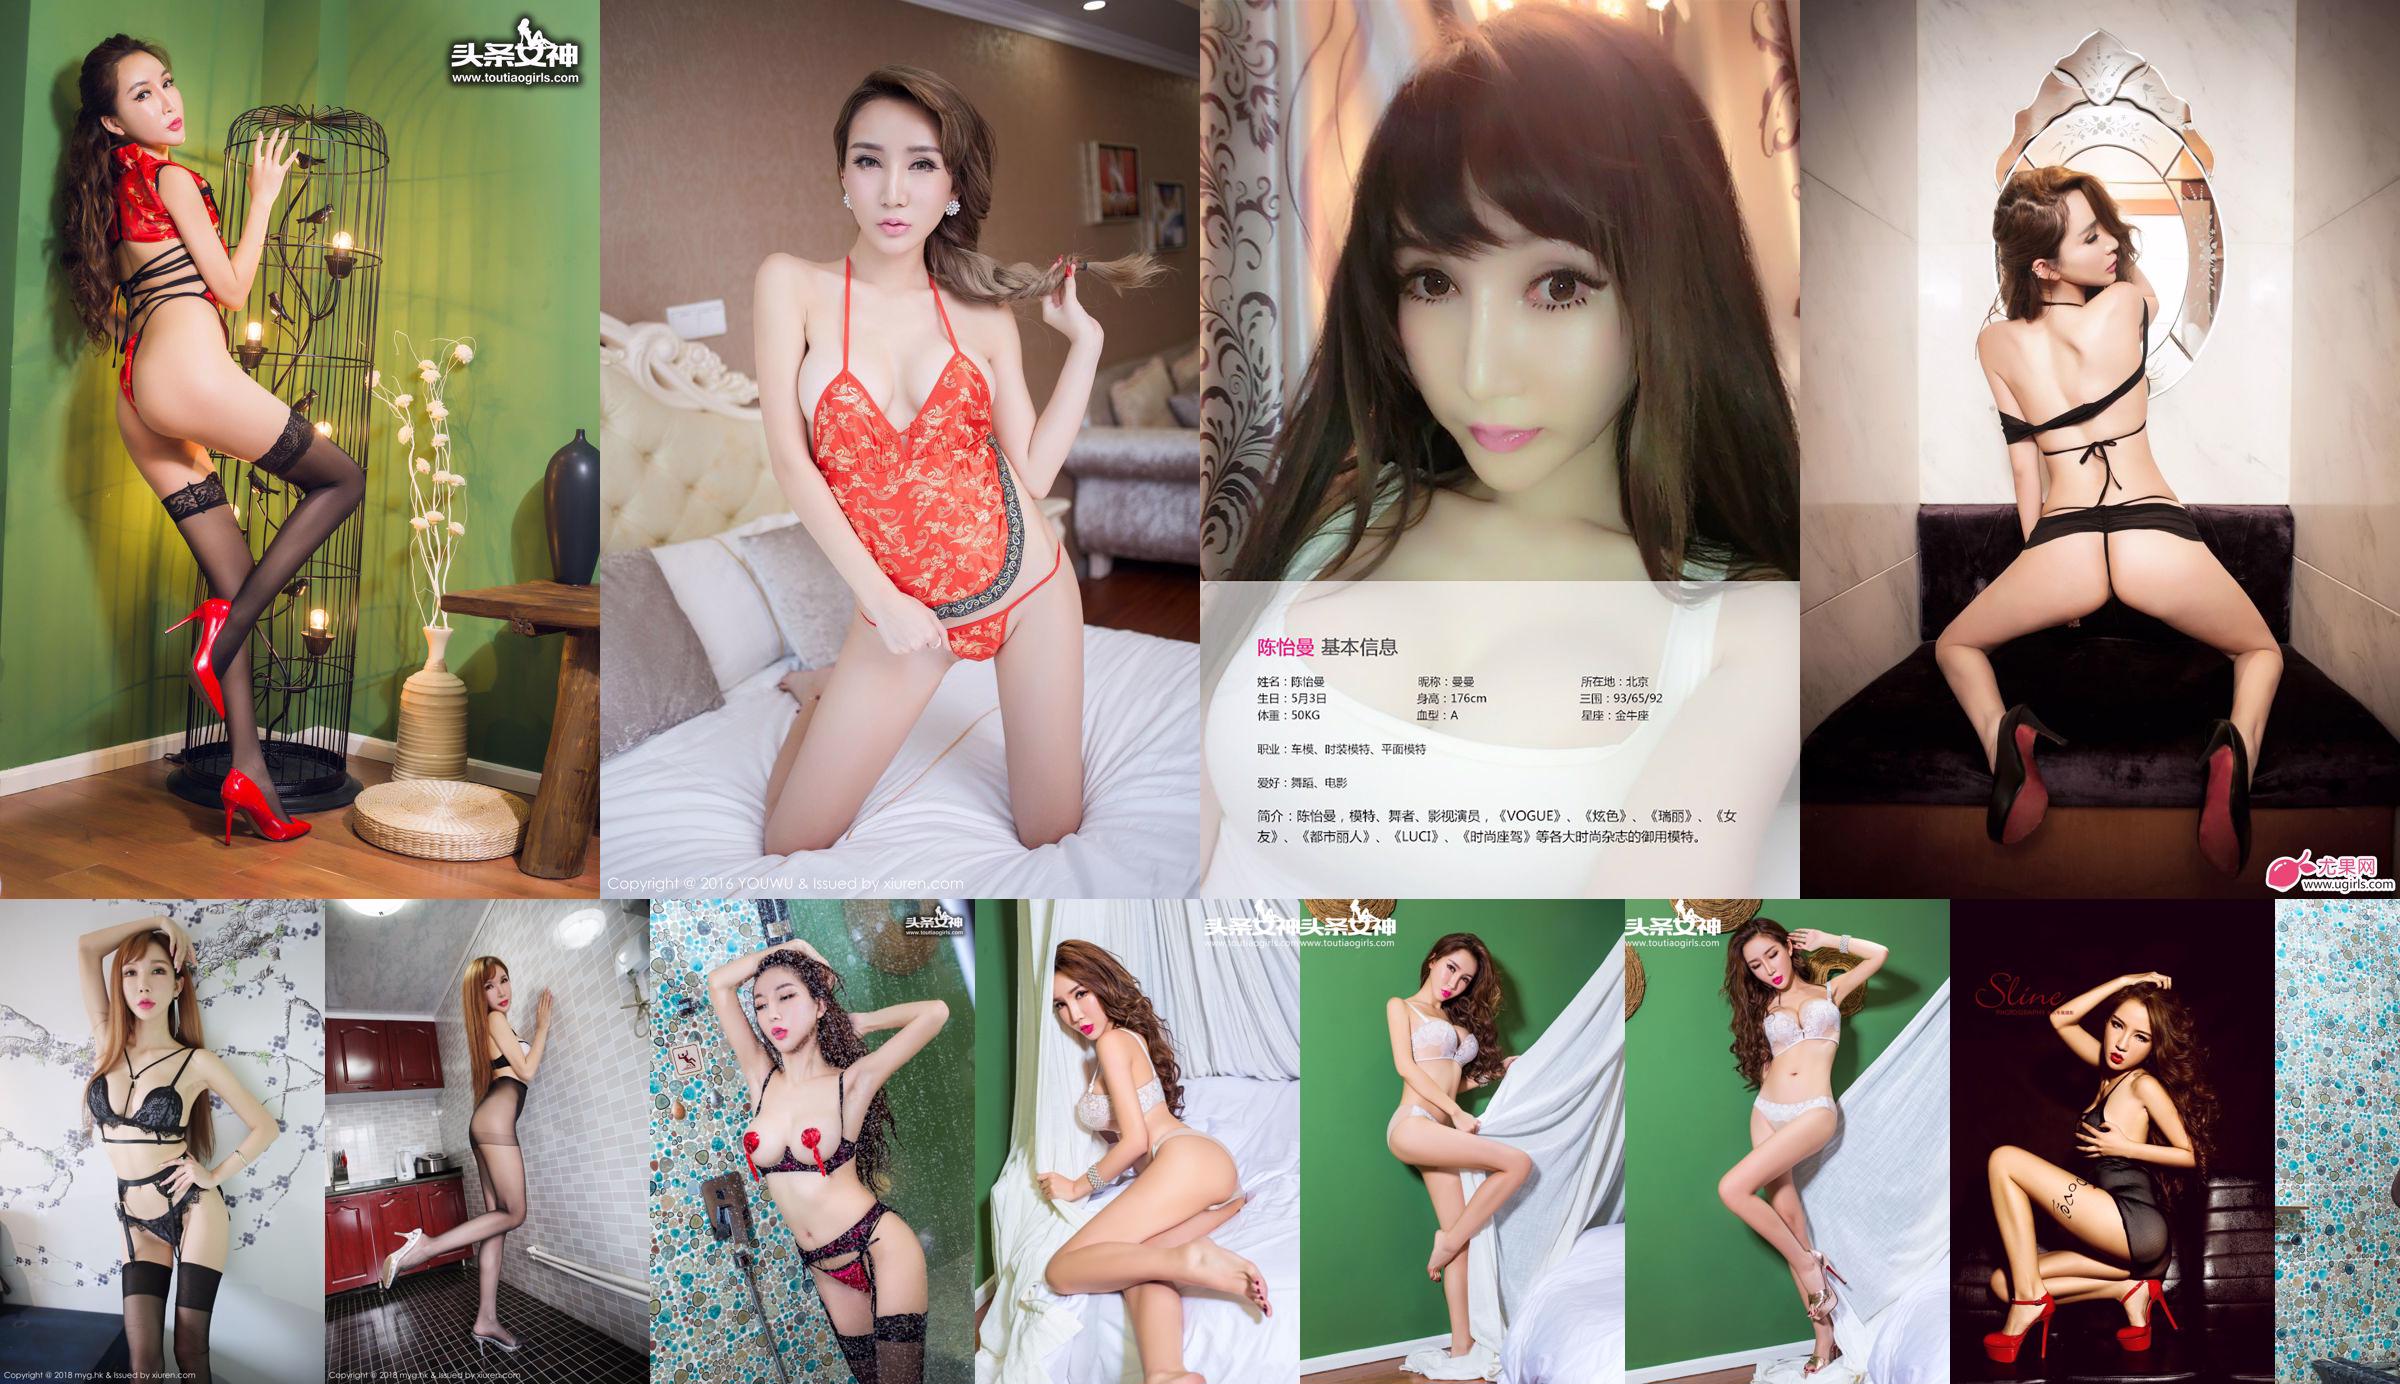 Internet celebrity model @陈怡曼coco "Sexy Belly + Sexy Lingerie" [Youwuguan YouWu] Vol.007 No.2e06dc Page 5